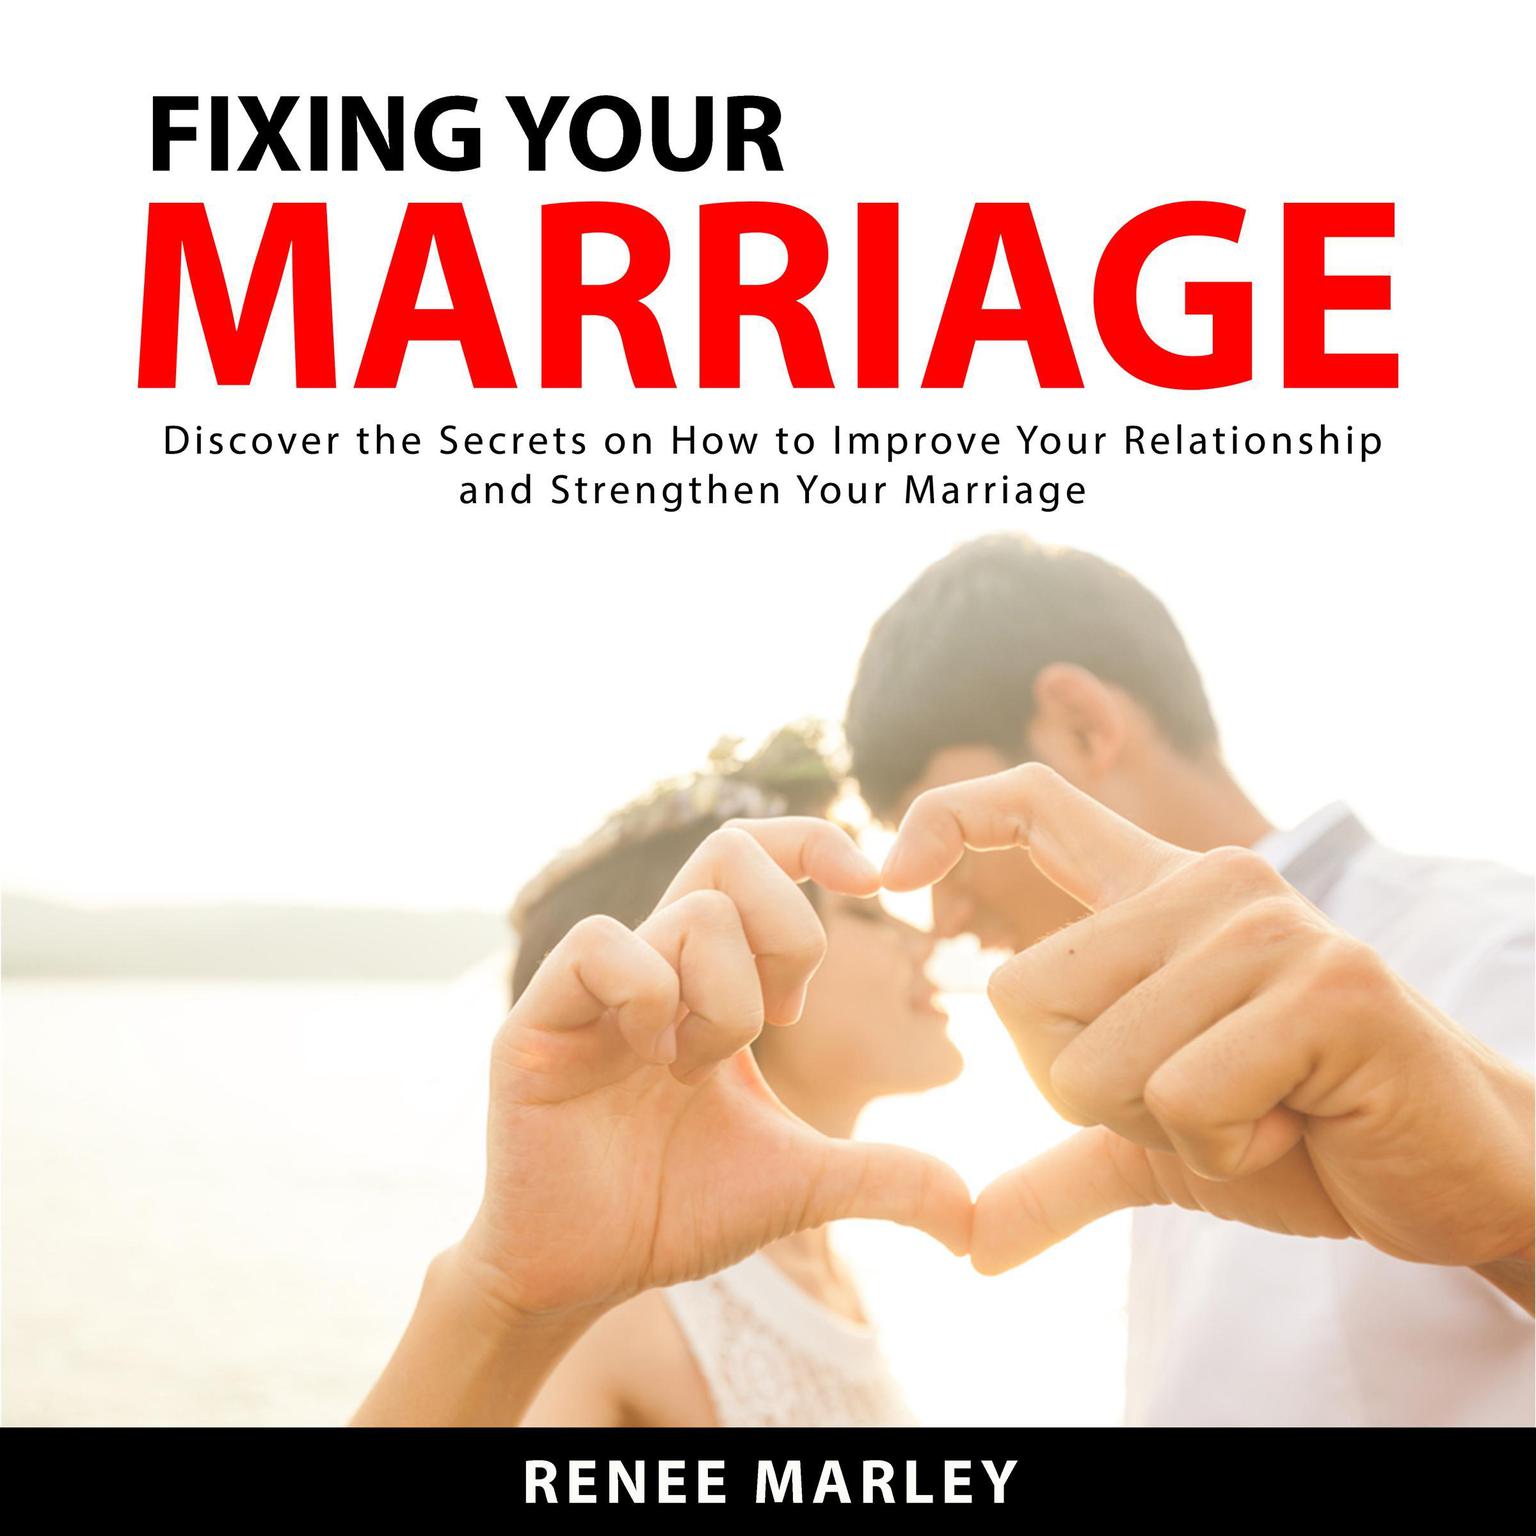 Fixing Your Marriage: Discover the Secrets on How to Improve Your Relationship and Strengthen Your Marriage Audiobook, by Renee Marley